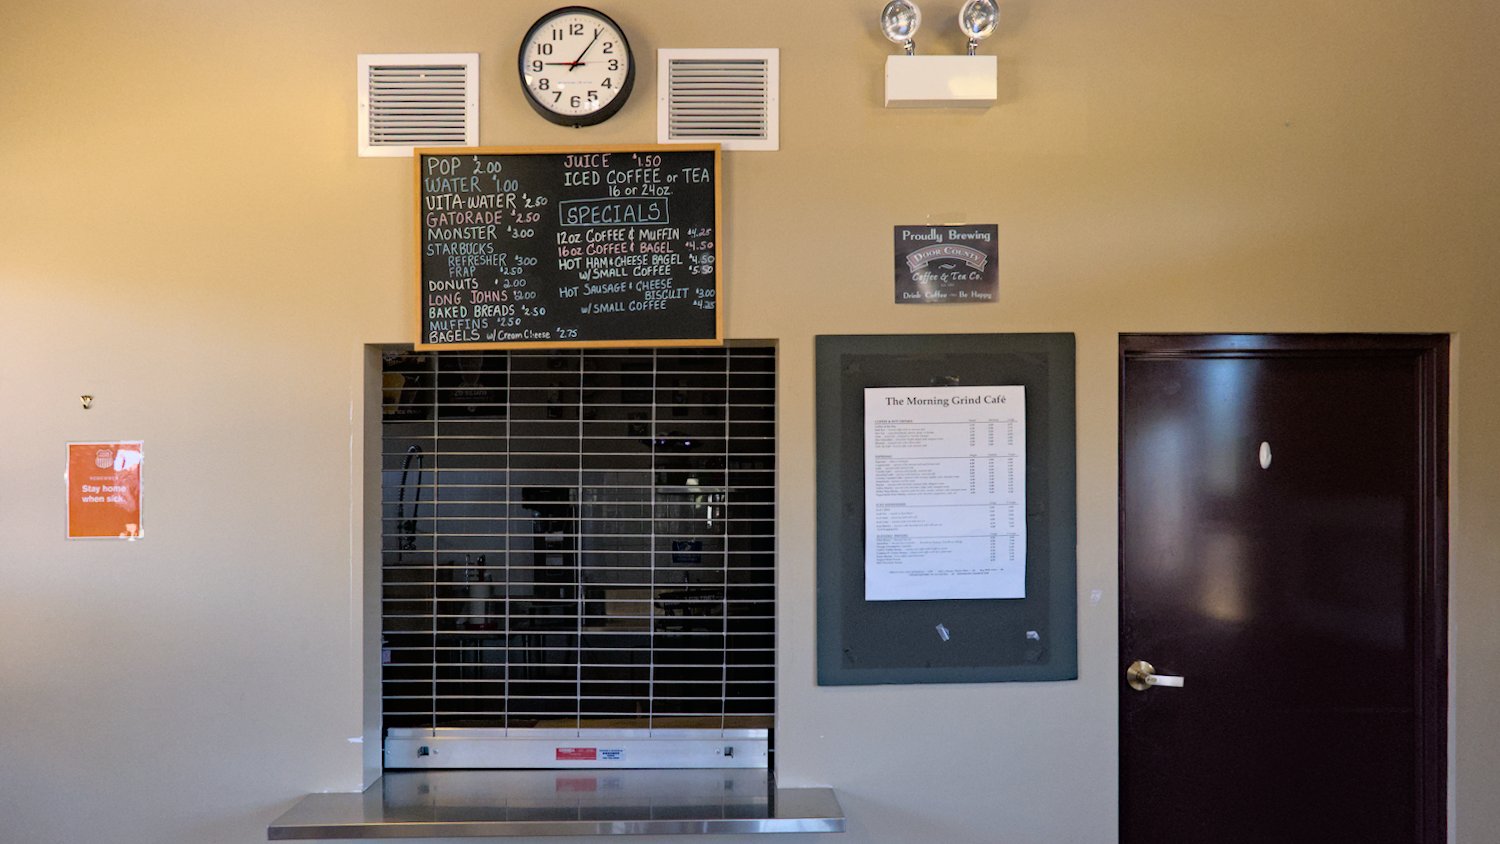 Menu board for The Morning Grind Cafe inside the Fox River Grove Metra station.